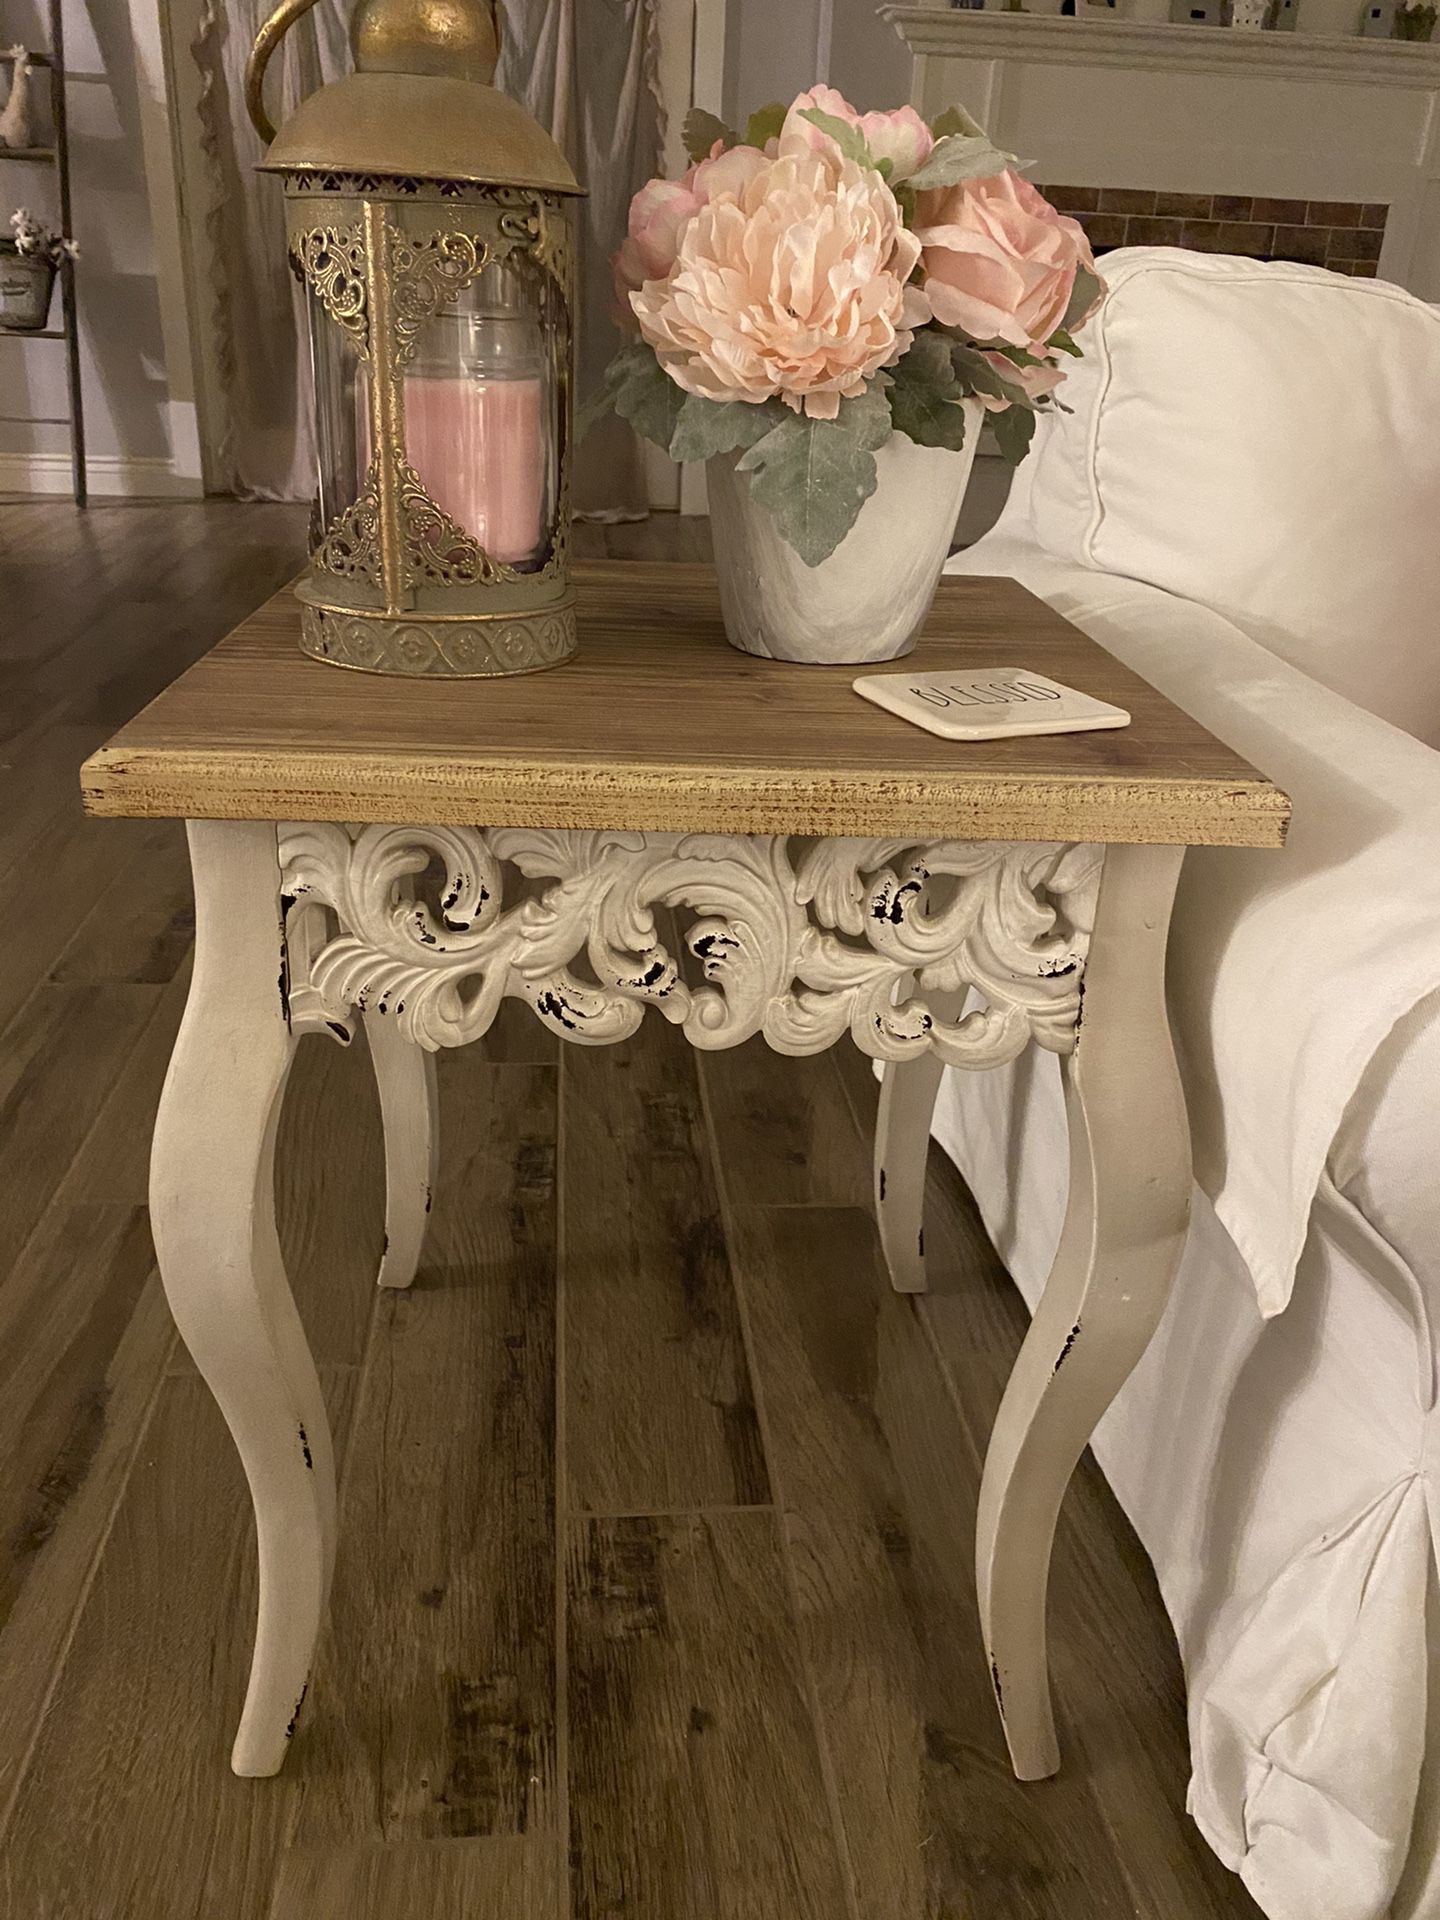 Two beautiful end tables